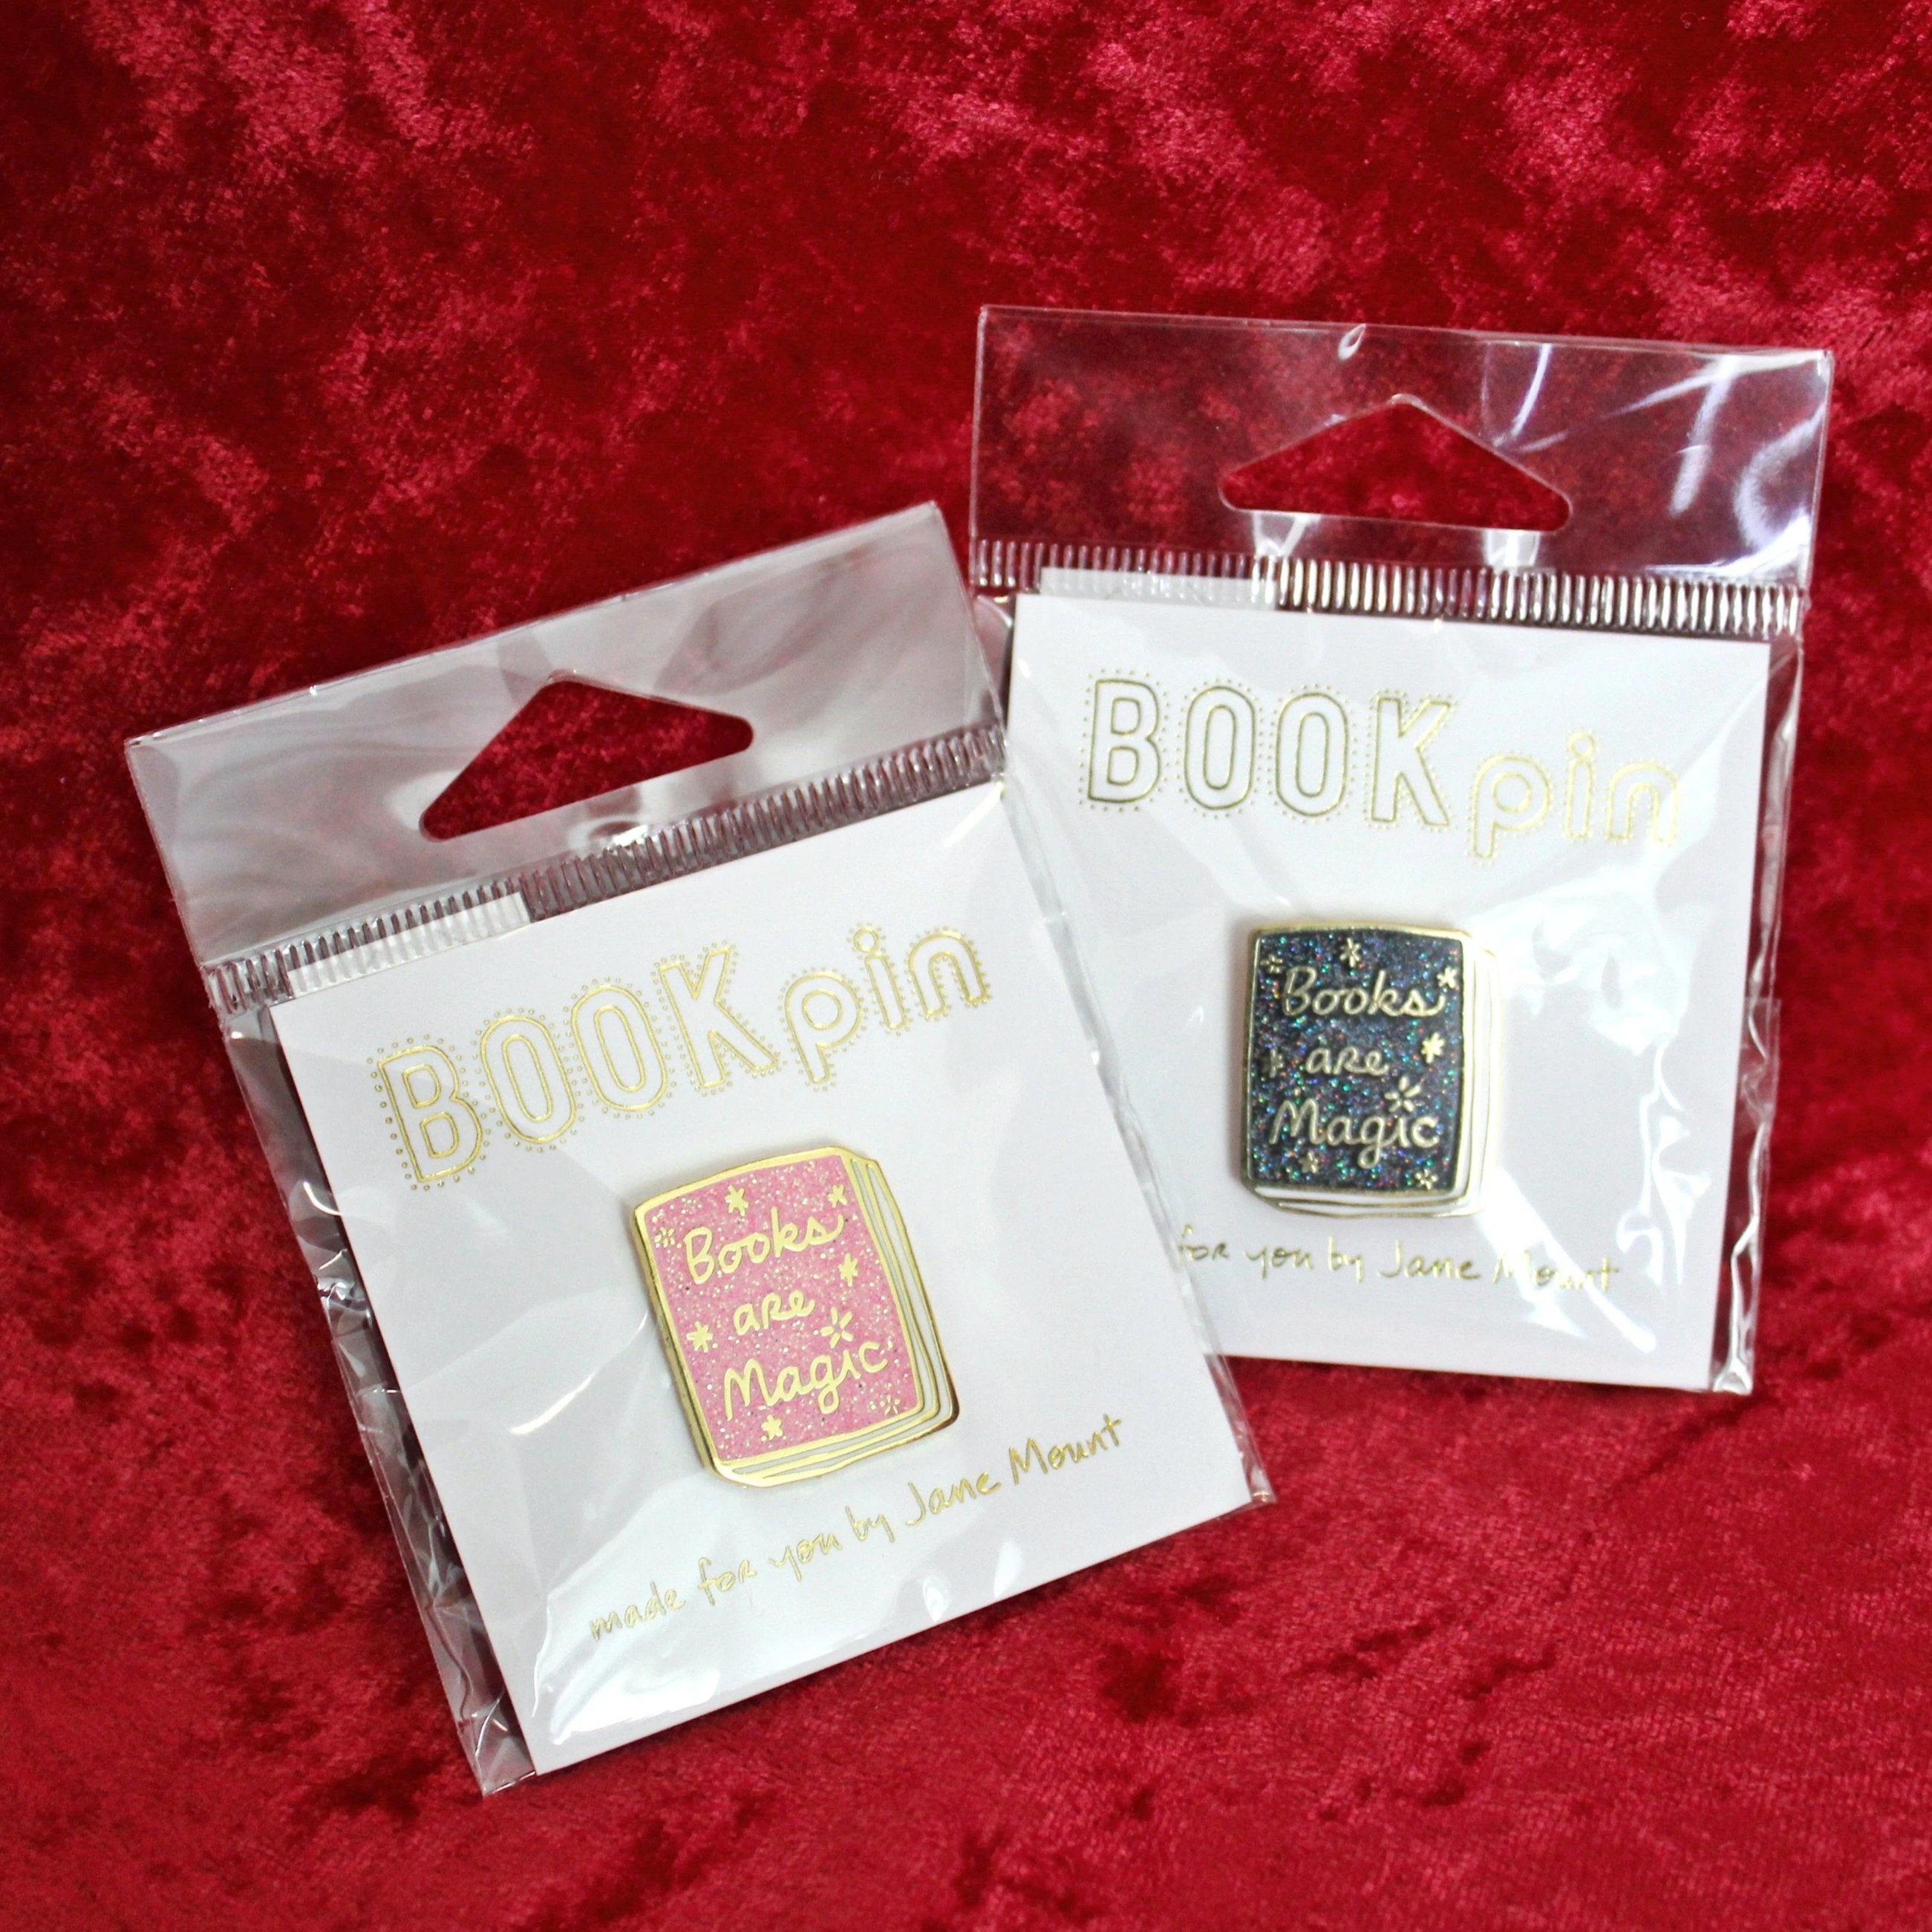 2 inch metallic gold pins with a book cover design; "Books Are Magic" in script font. Available in pink or black.